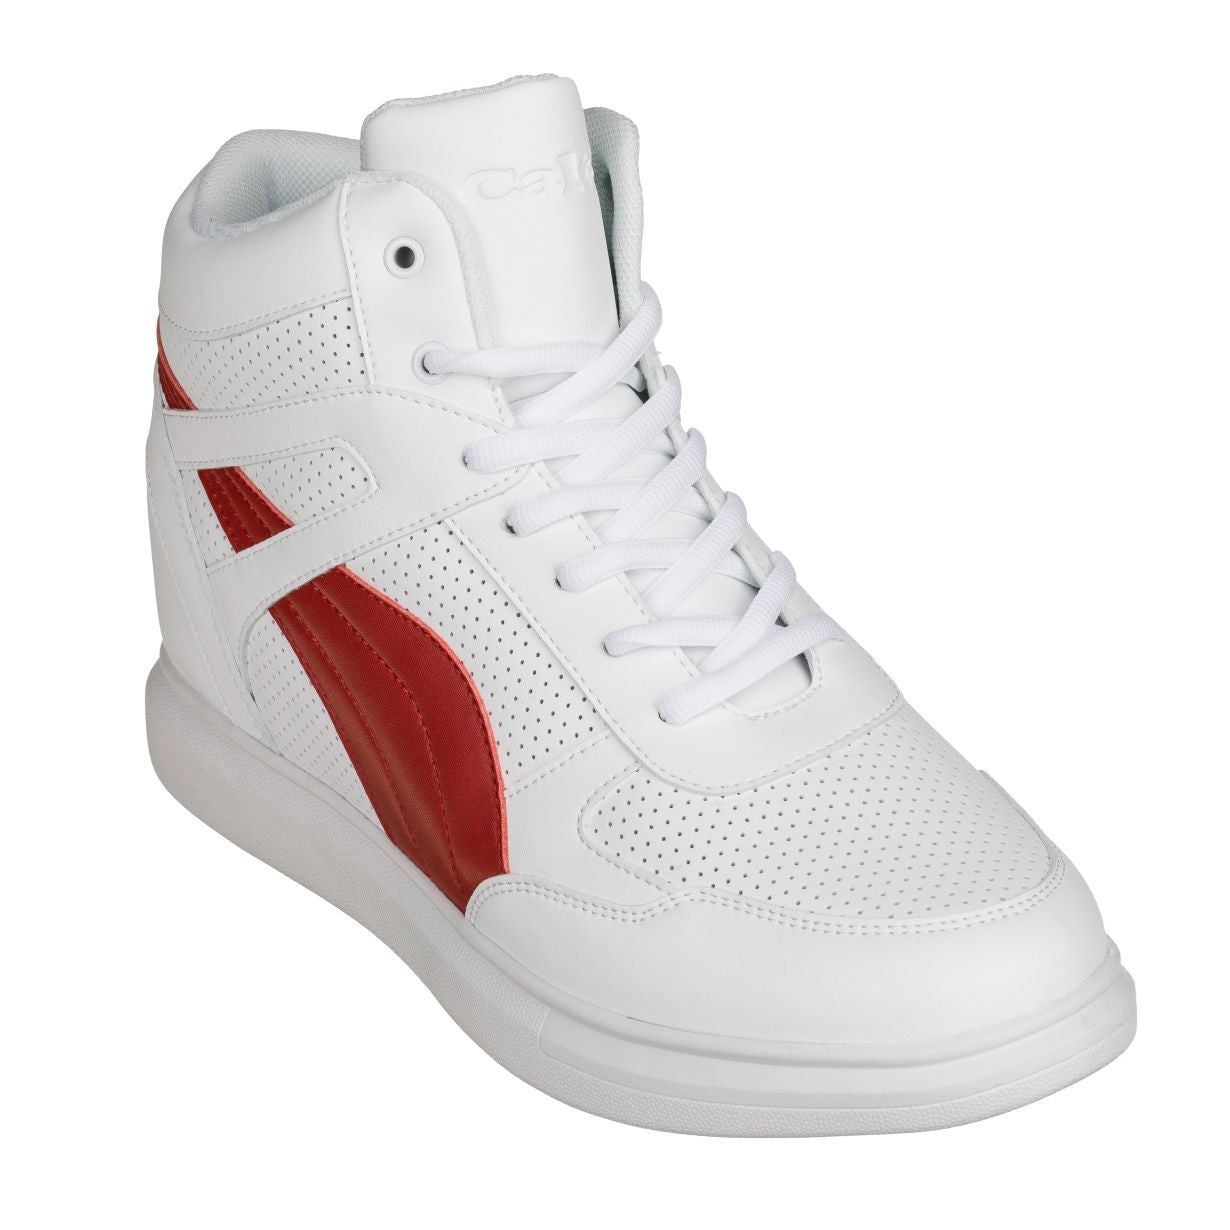 Elevator shoes height increase CALTO - H71902 - 3.8 Inches Taller (White/Red)